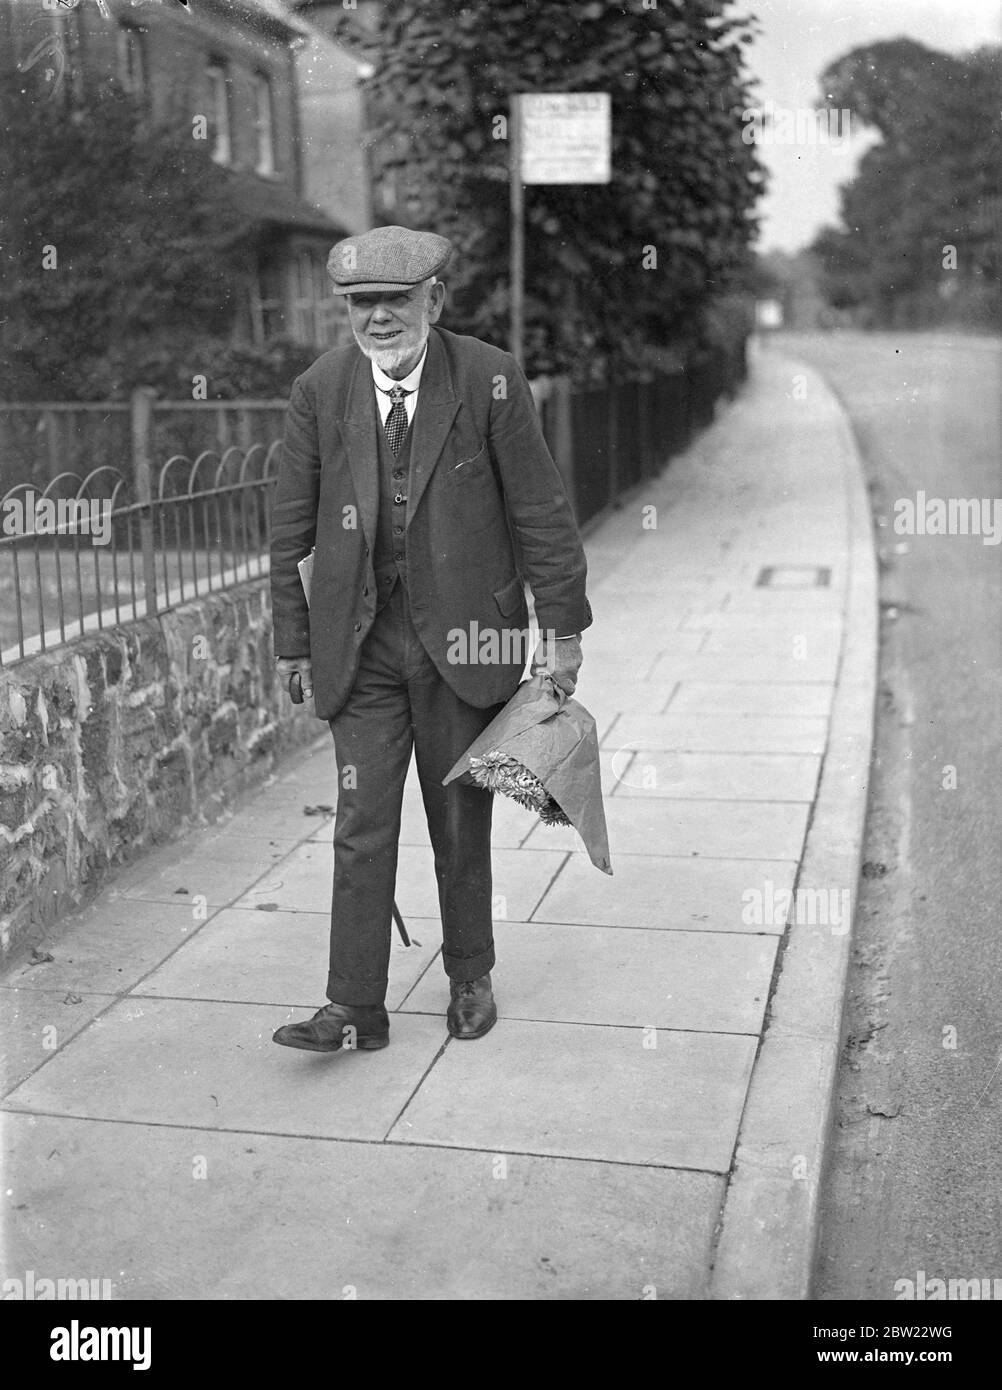 Mr. A.J Franklin who will be the first Mayor of the Newborough leaving his Bexley home with a bouquet of flowers grown in his garden. The 77-year-old market gardener who was born in the parish church bells will be the first Mayor when the town becomes a bar at the end of this month. 15 September 1937. Stock Photo